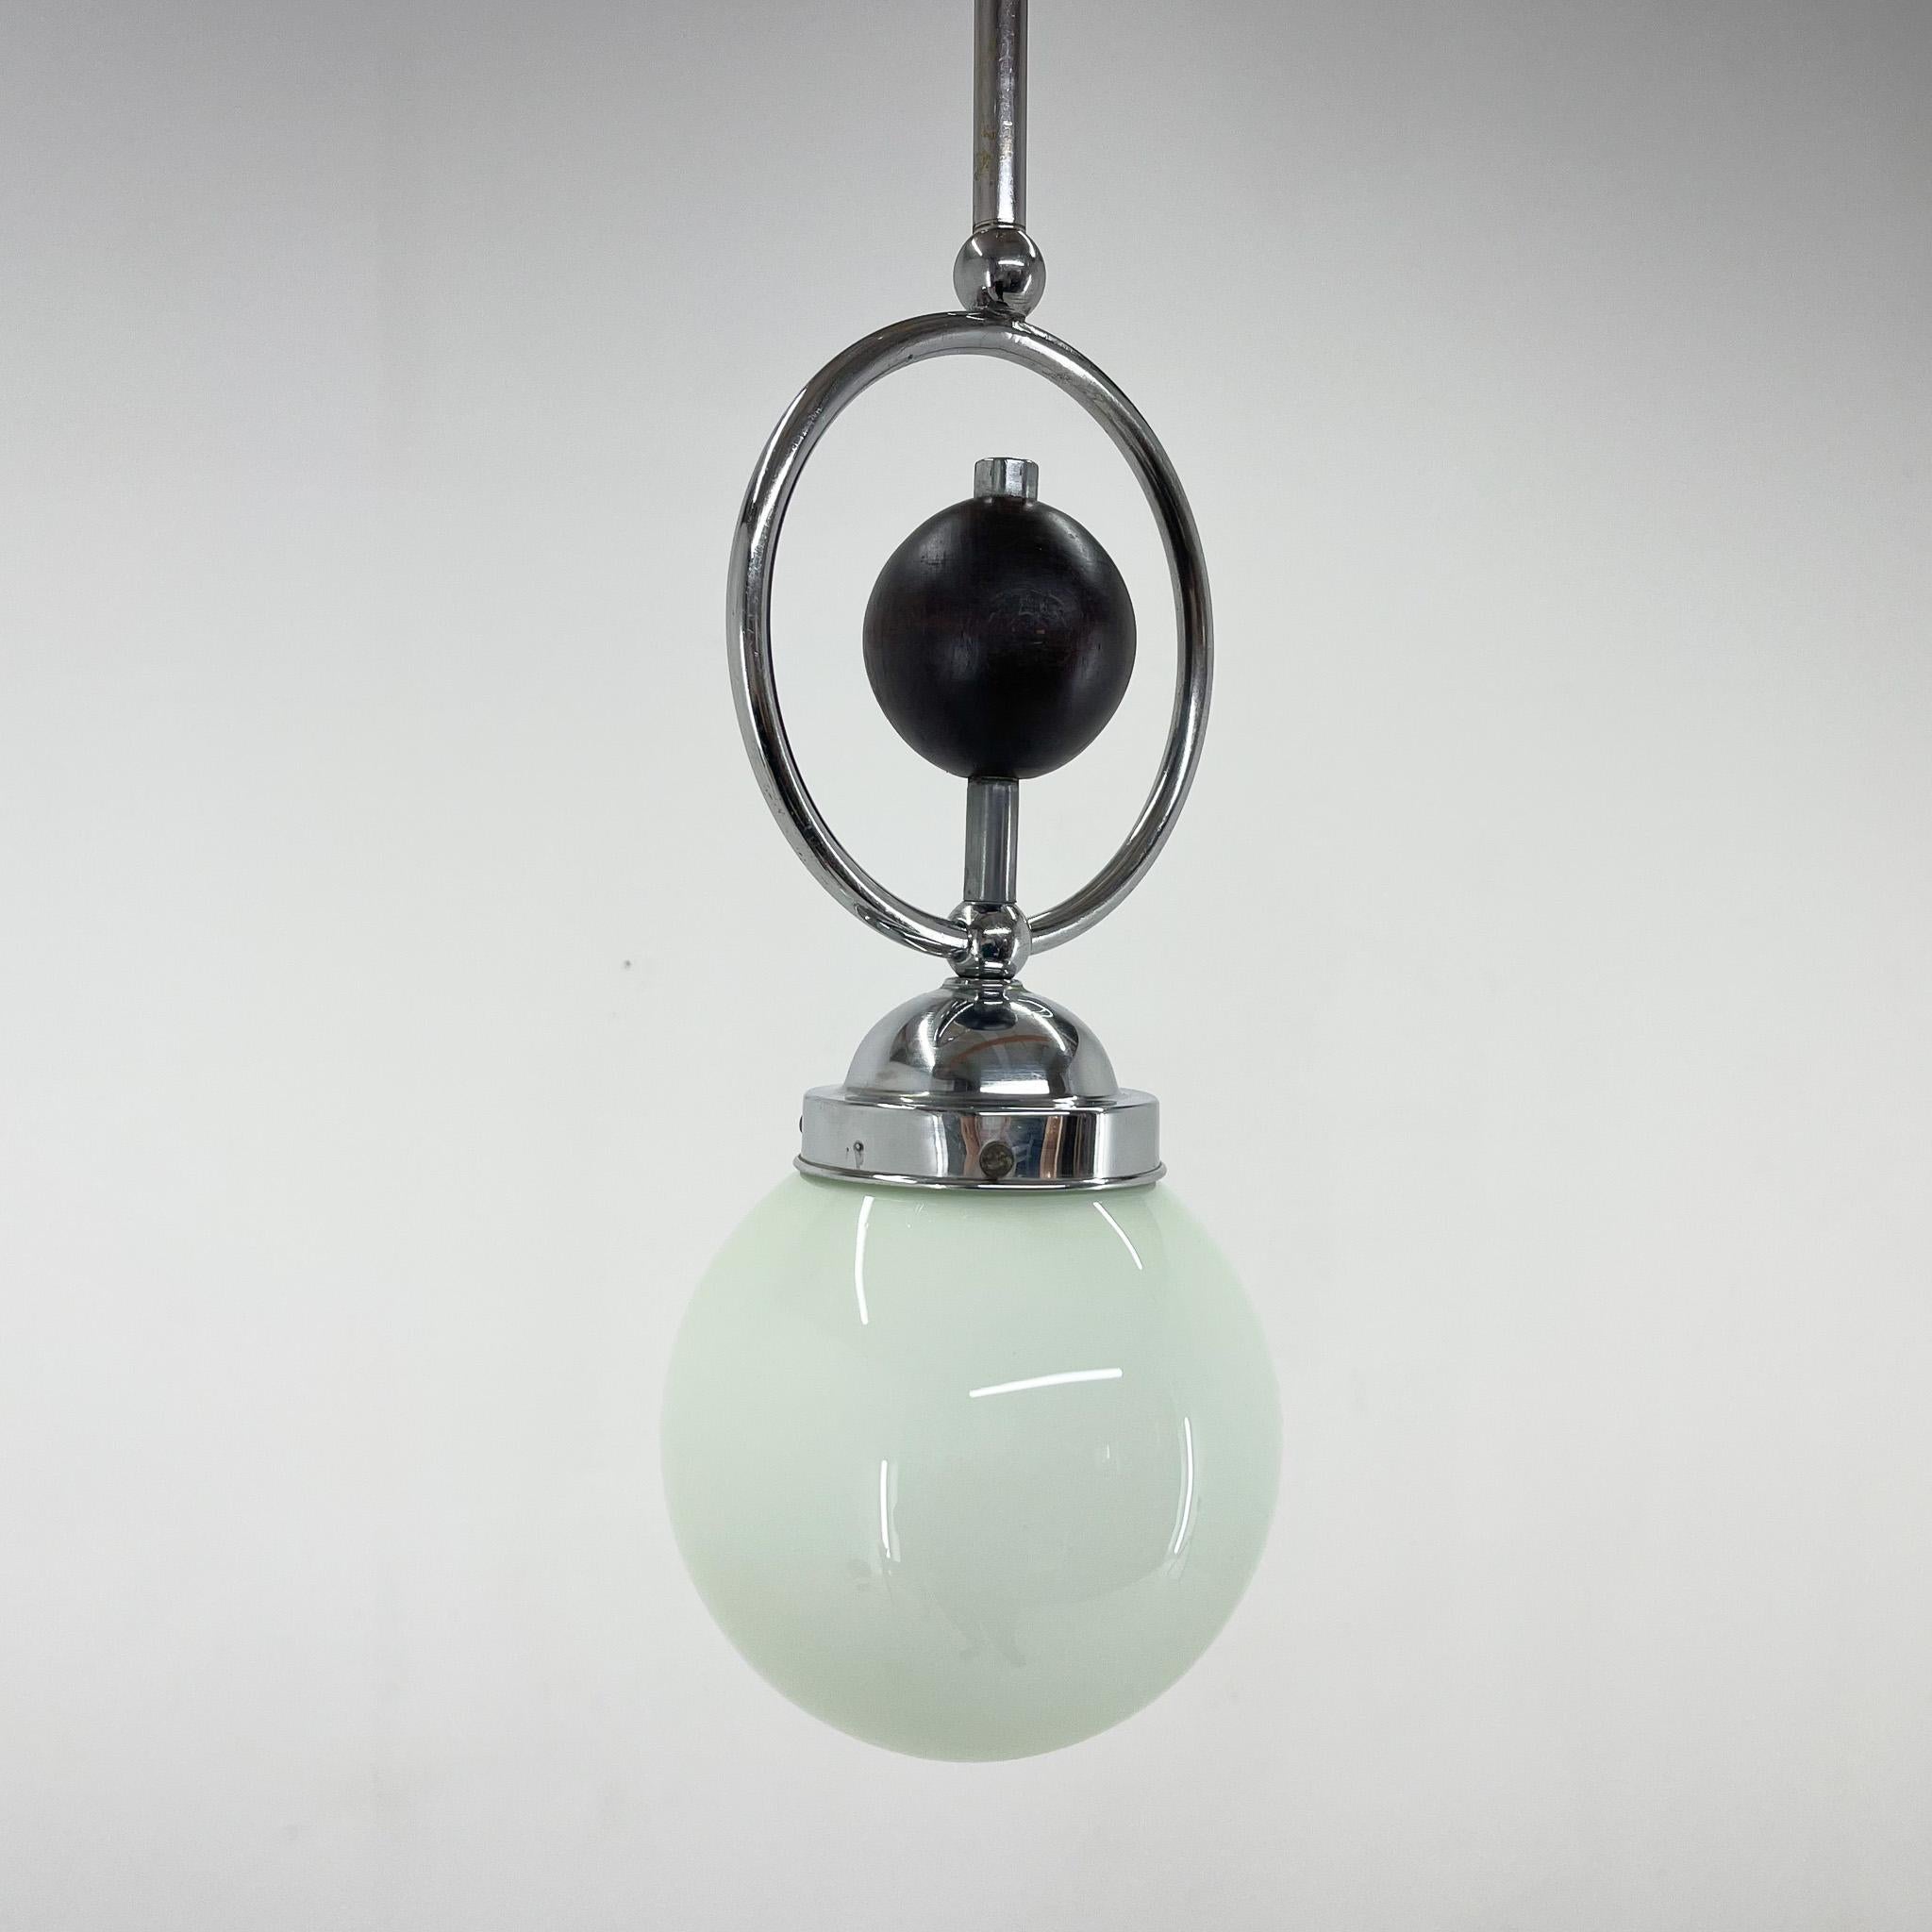 Art Deco Chrome Pendant Light with Wooden Decor In Good Condition For Sale In Praha, CZ